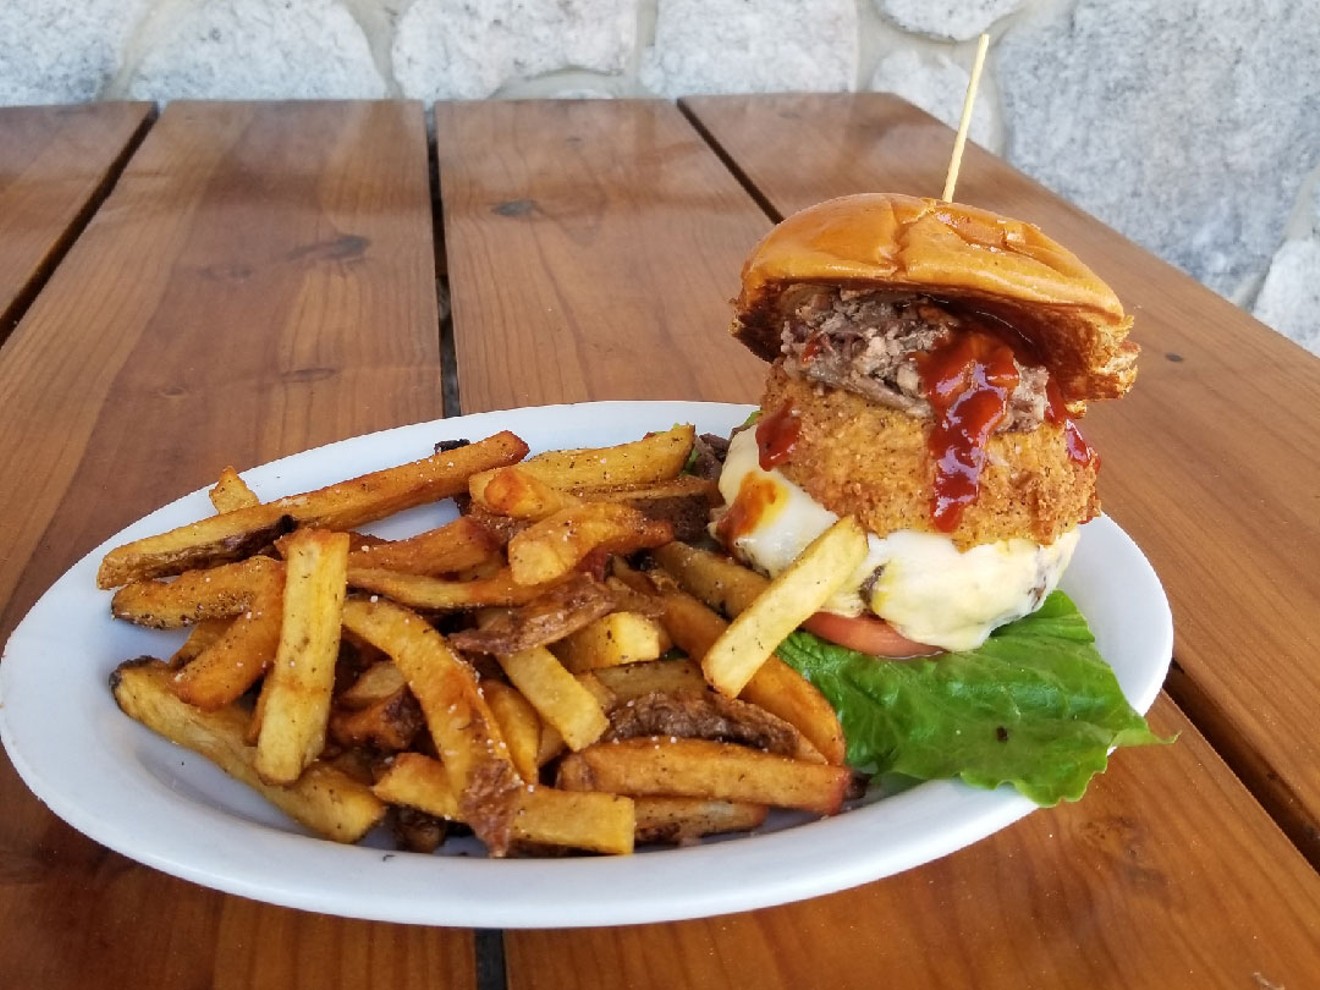 The Elvis cheeseburger is a smoked patty topped with provolone and American cheese, plus a huge onion ring filled with chopped brisket and topped with BBQ sauce, Romaine lettuce and tomato on a challah bun ($14.99).